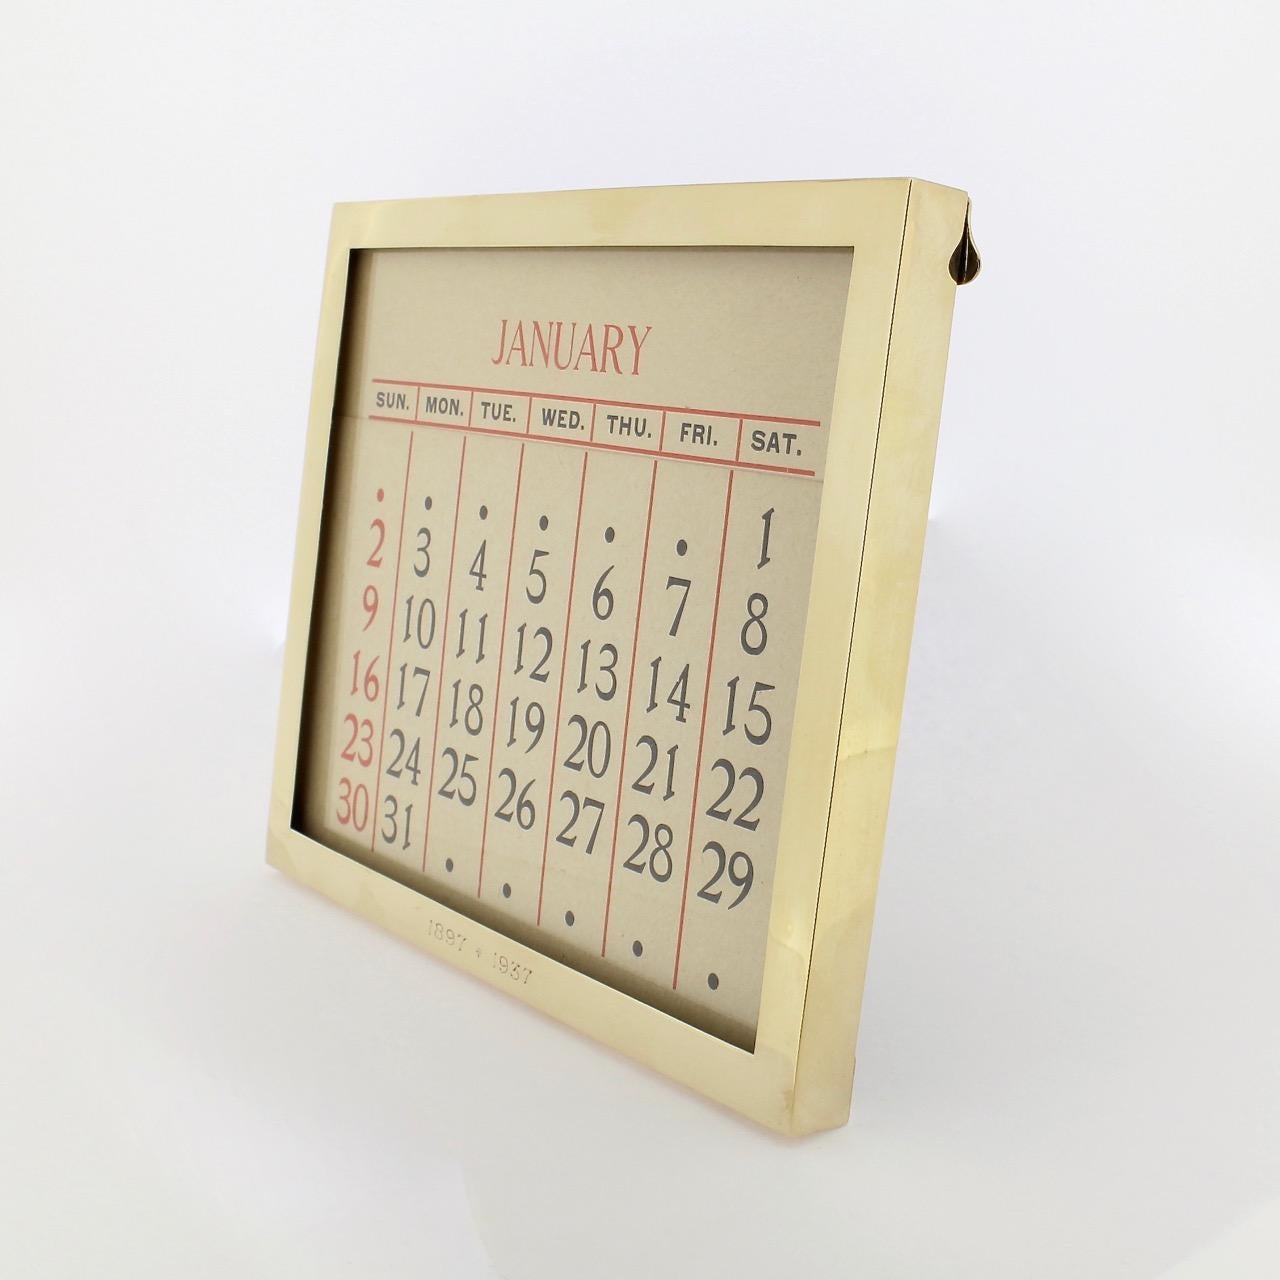 A very fine and rare Cartier 14k gold desk calendar.

Dating from the Art Deco period.

The frame is complete 6 double-sided month cards and 7 date cards that create a 'programmable', fully-functional full-year calendar. It is supported by its